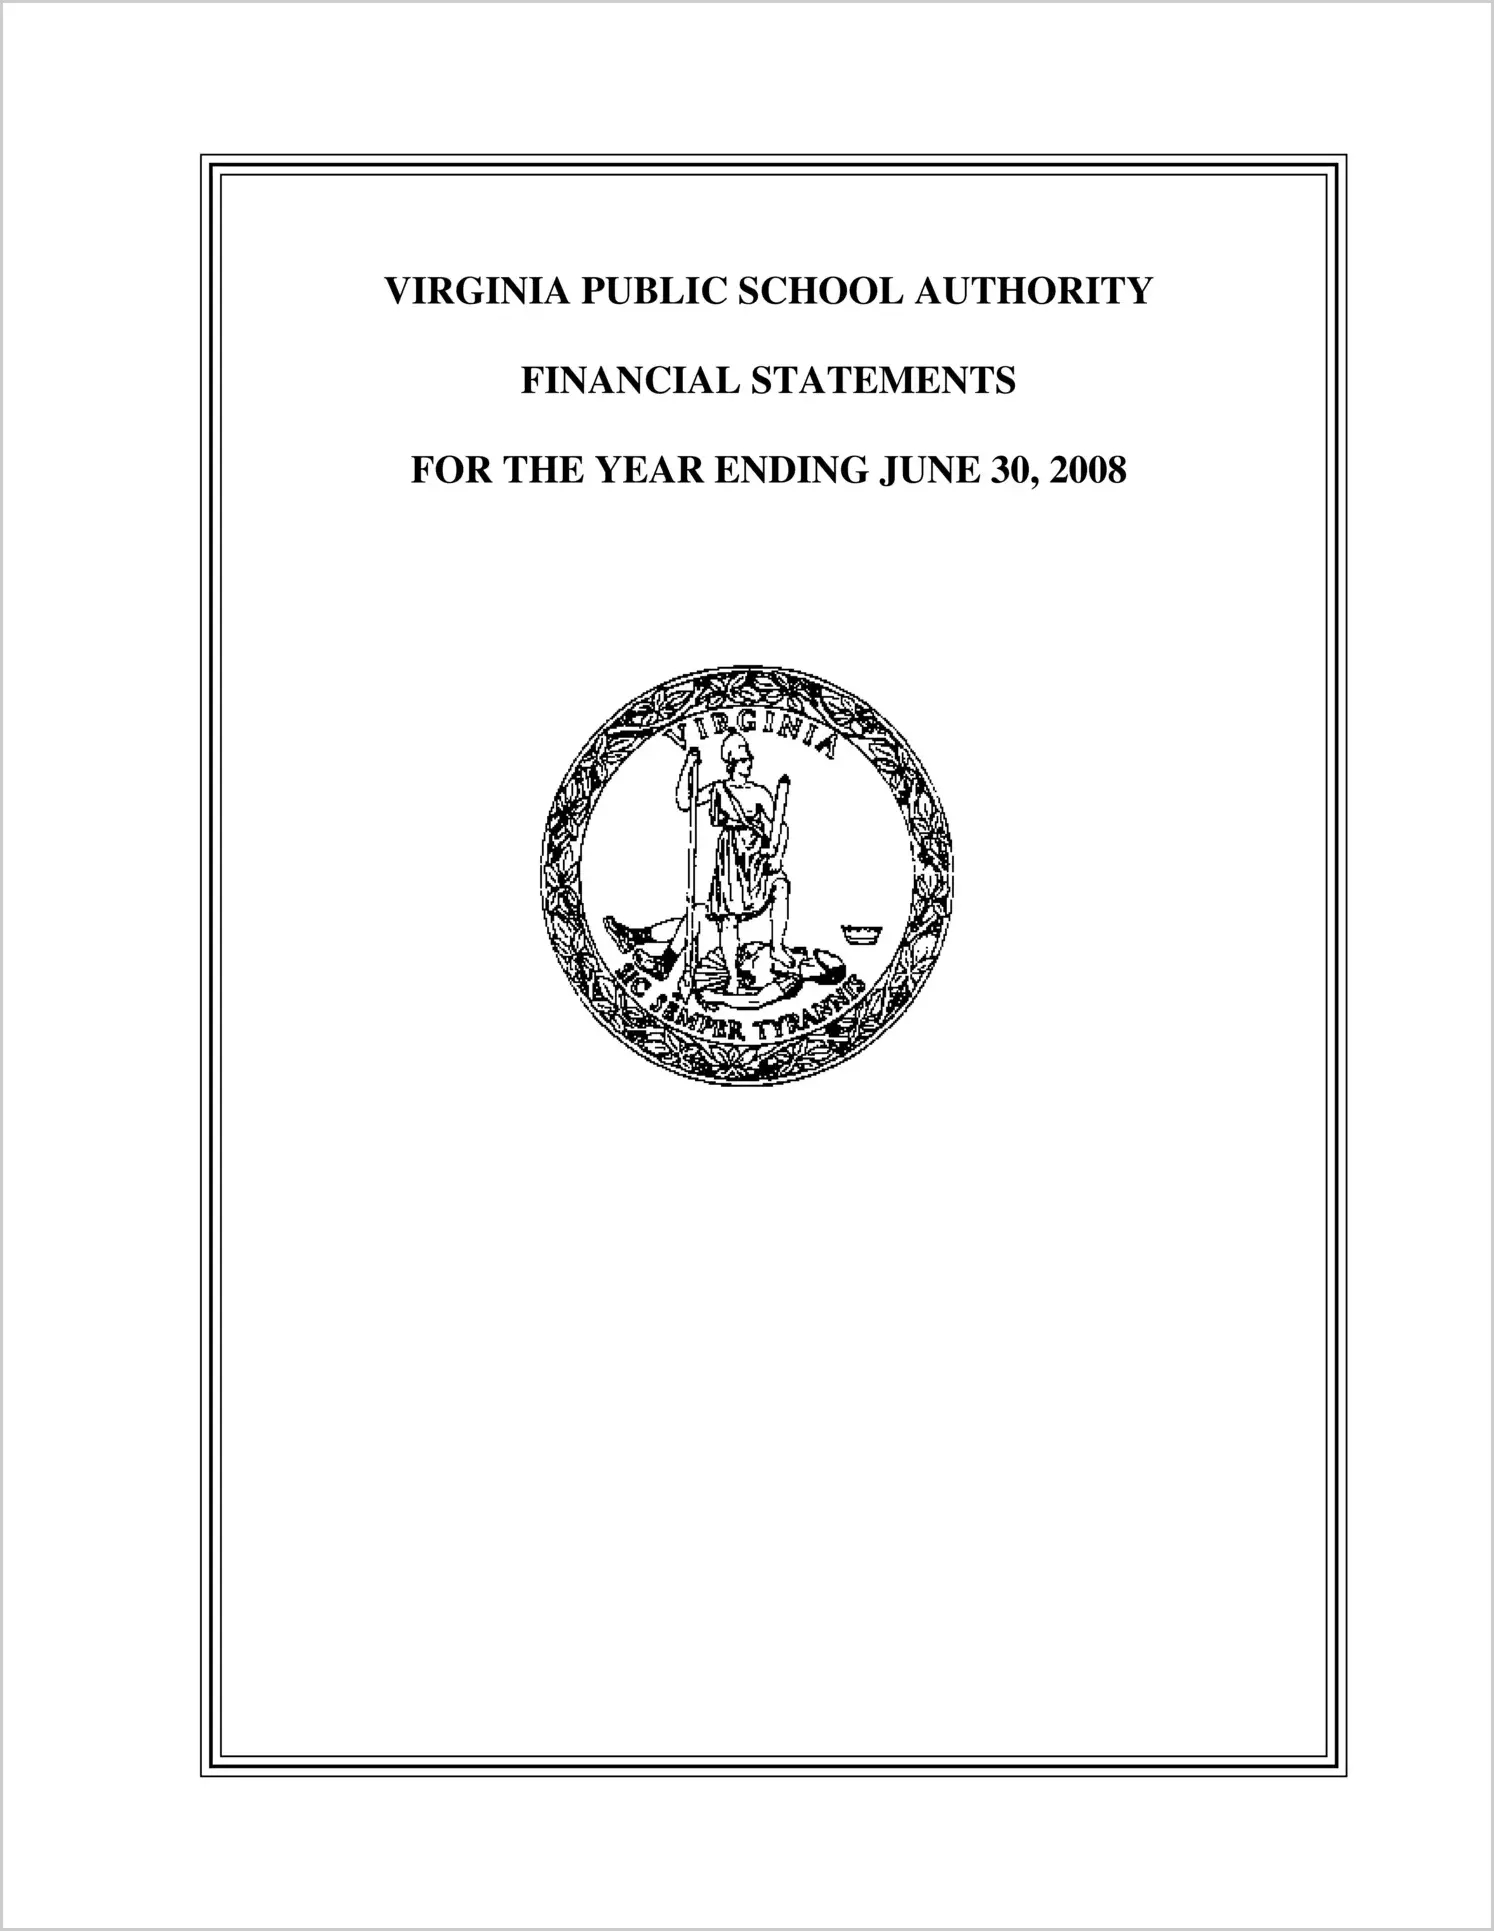 Virginia Public School Authority for the year ended June 30, 2008